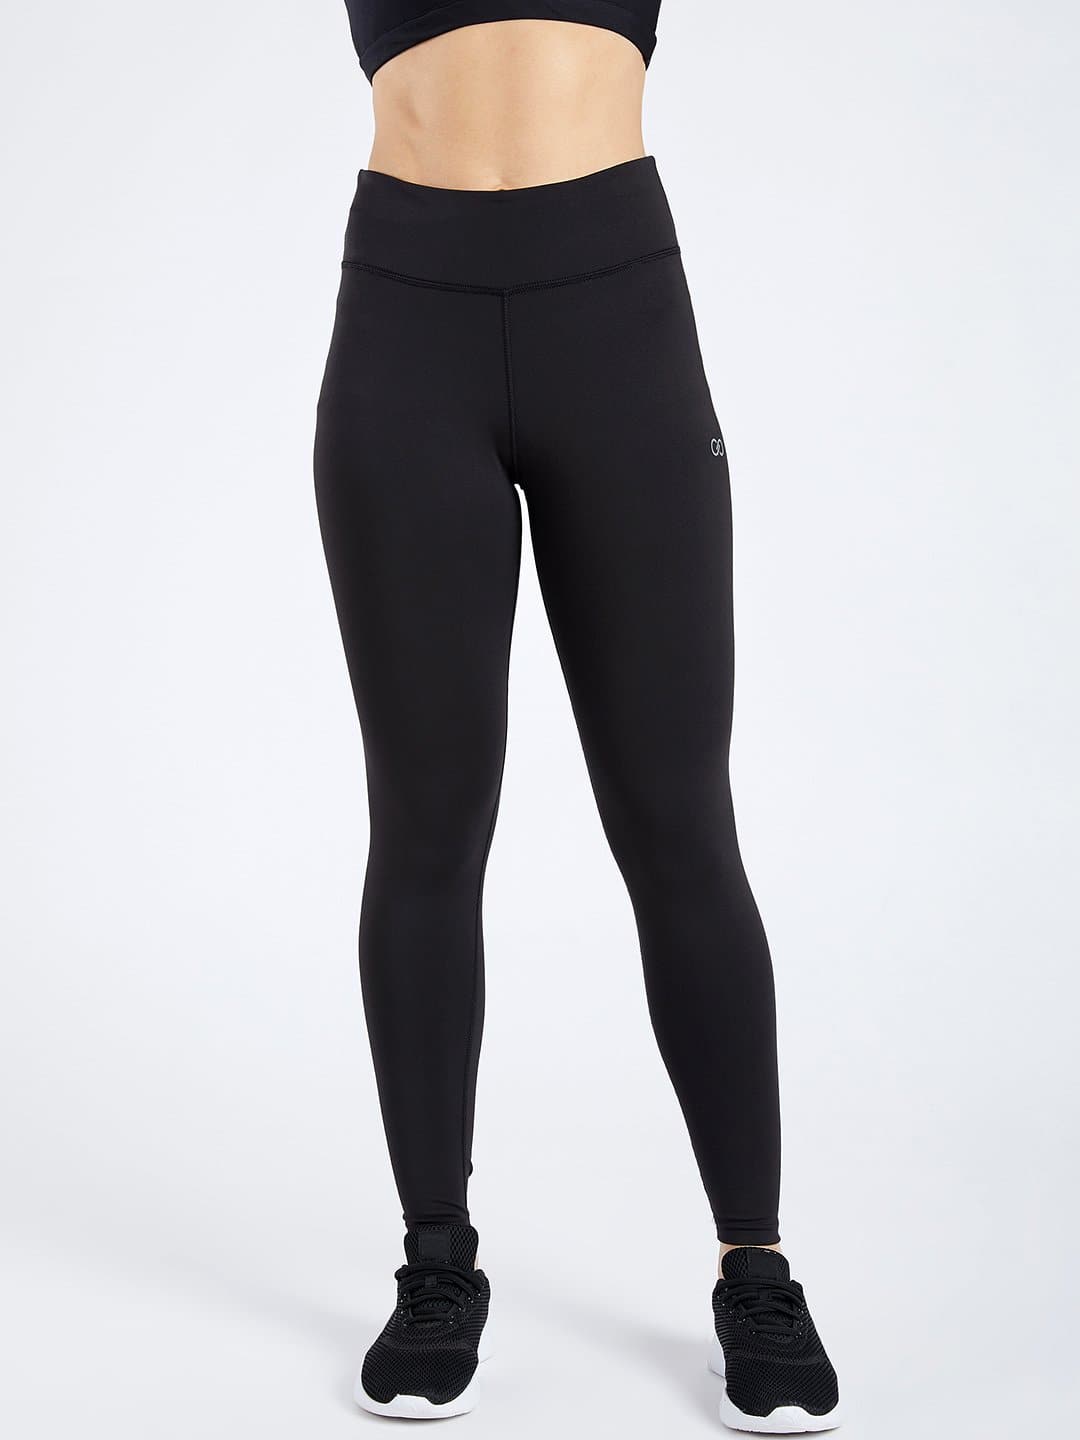 Creez Essential Active Black Ankle Length Leggings Tights